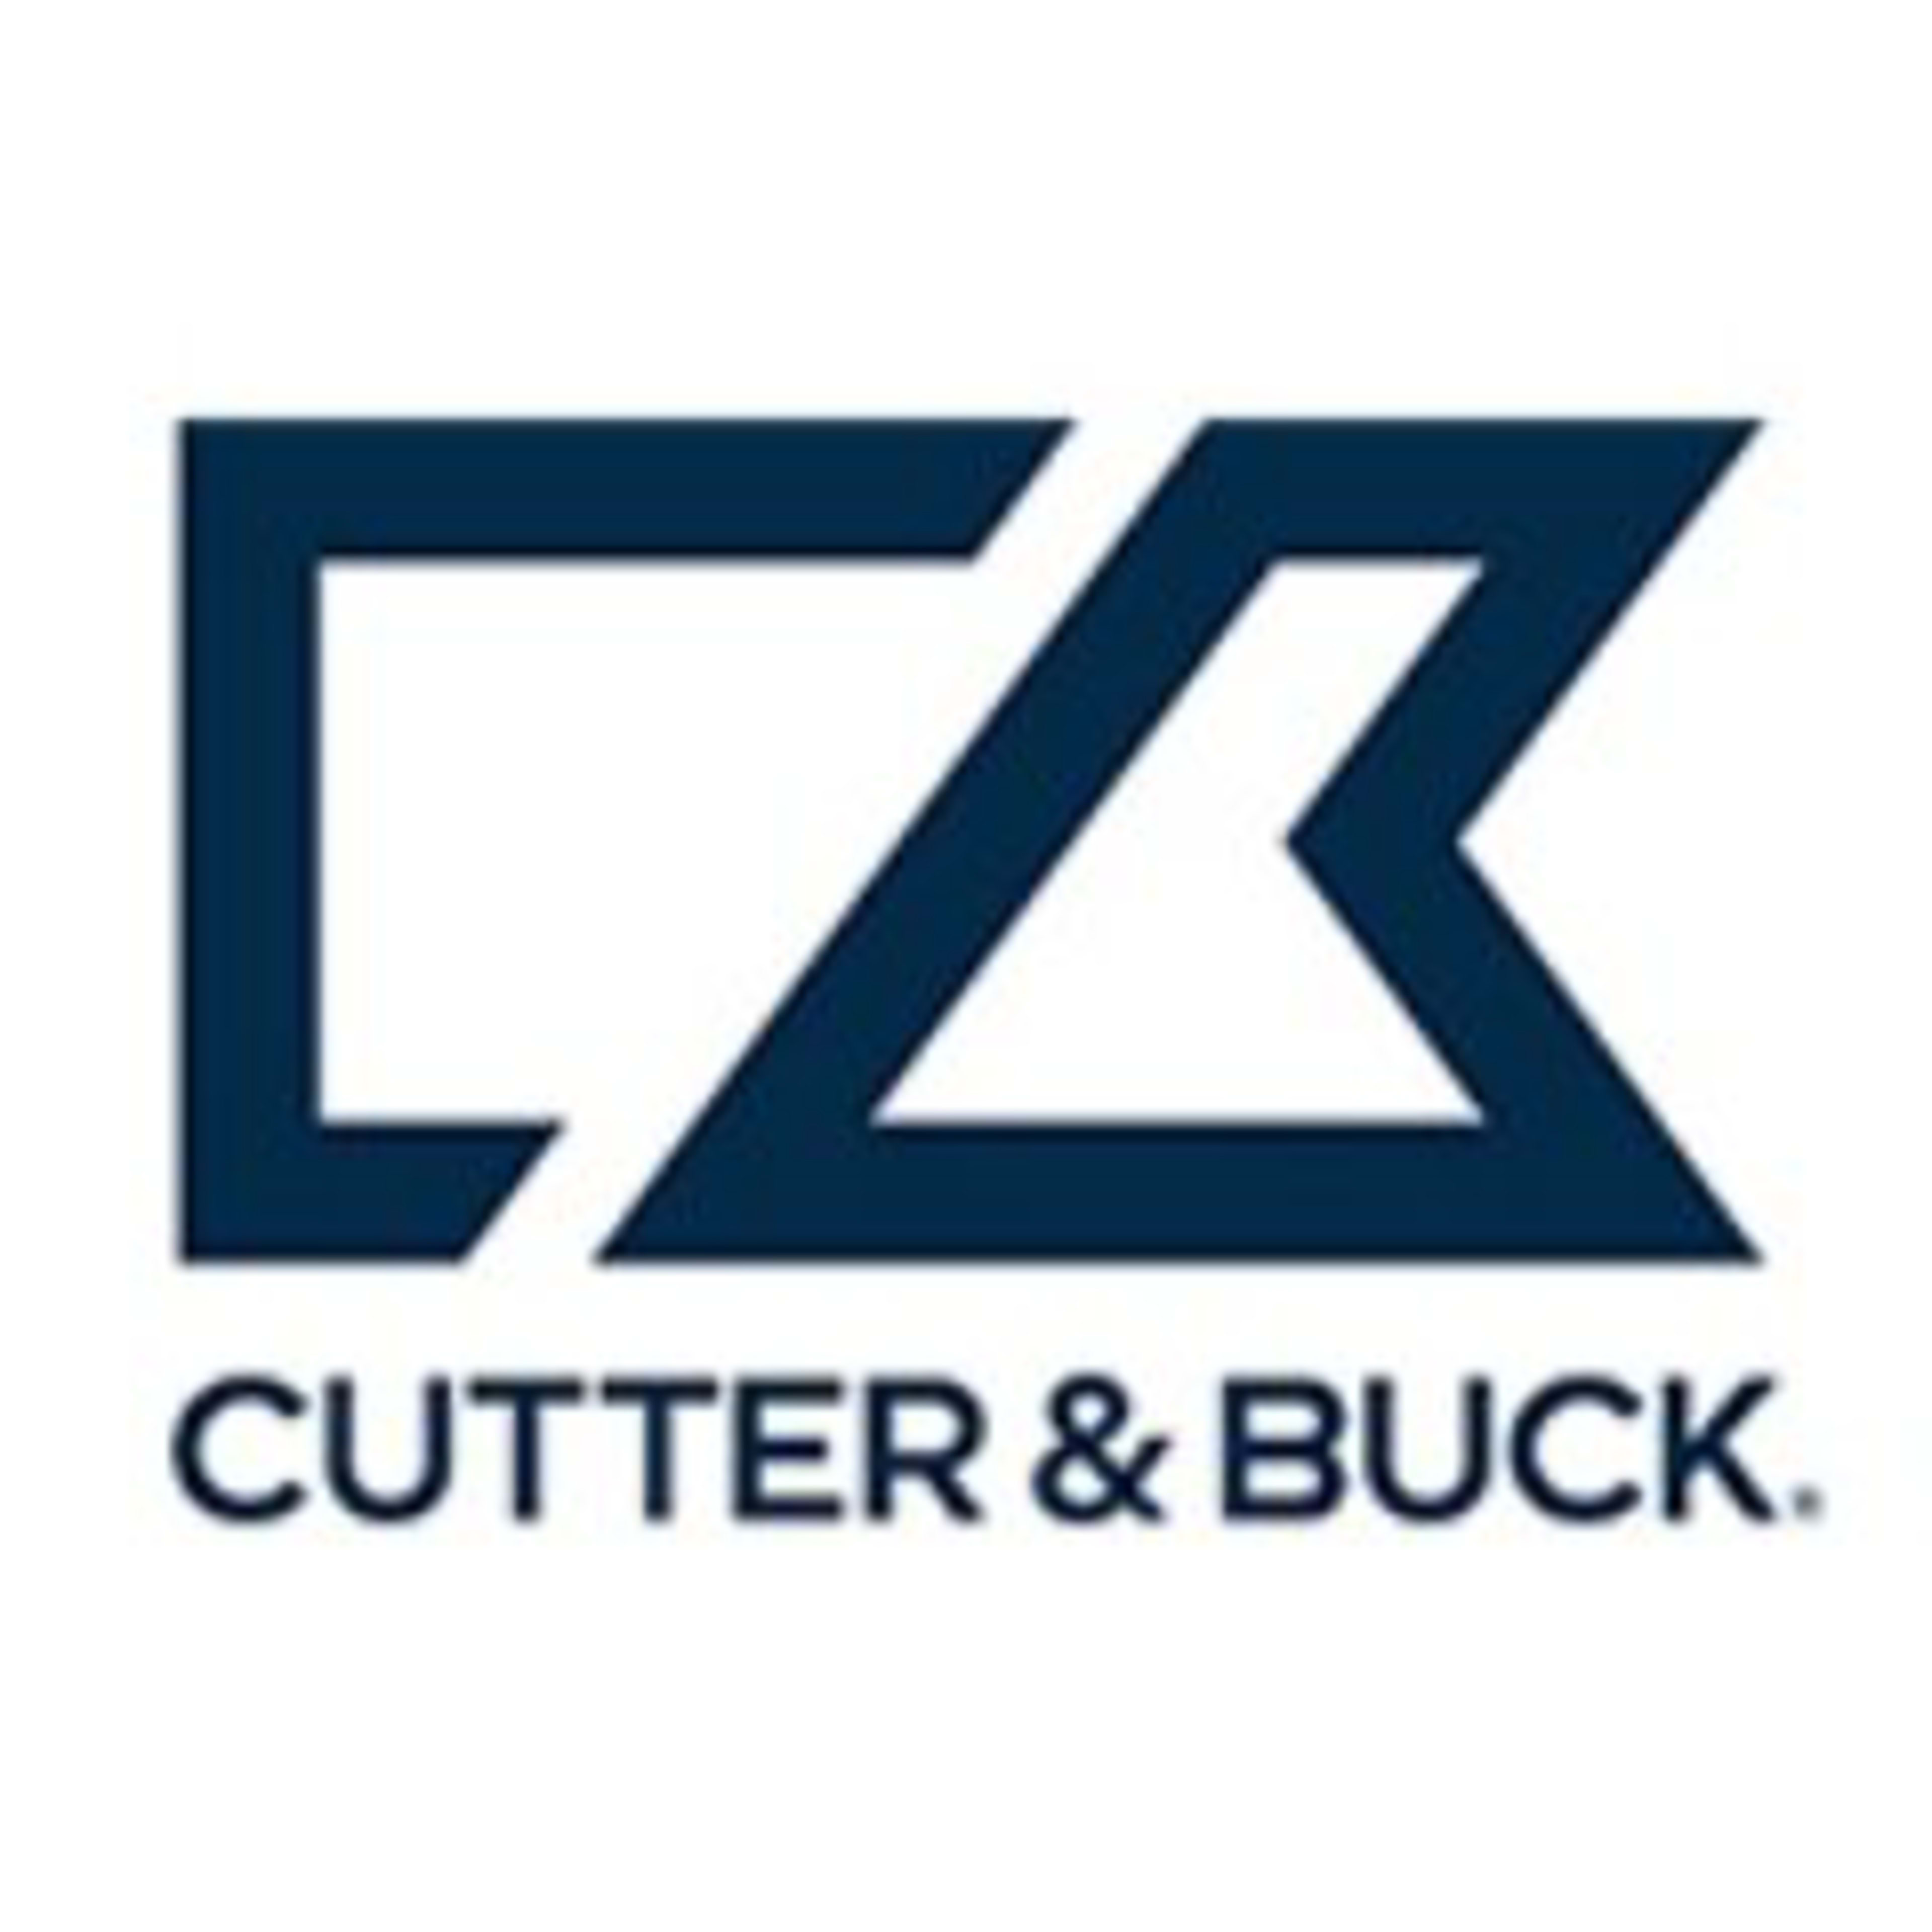 Cutterbuck.com COUPON CODES - 30% for Aug 2023